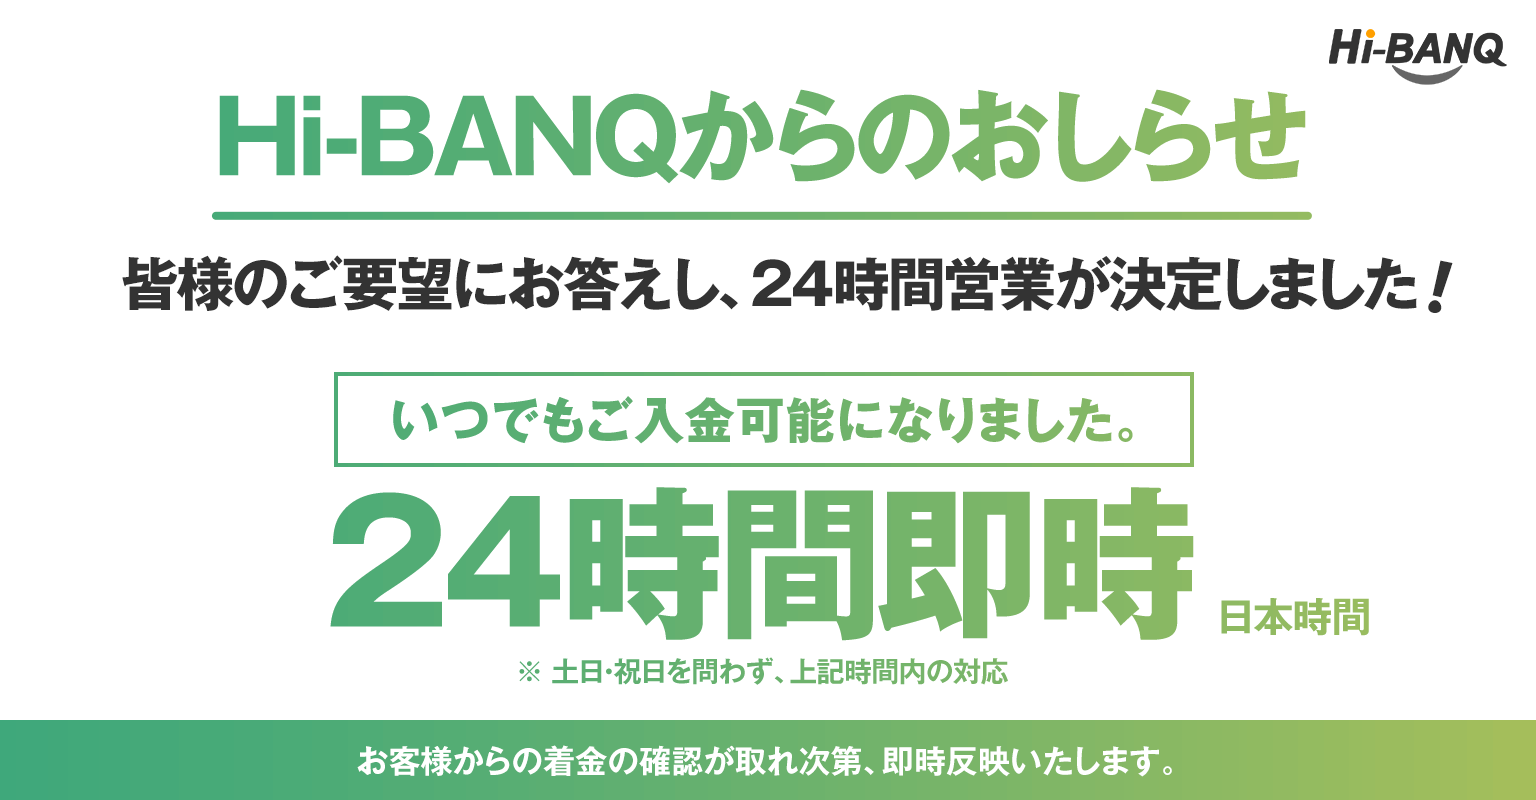 We have been operating Hi-BANQ on a trial basis. We are announcing that we have decided to open. Thank you for using Hi-BANQ.